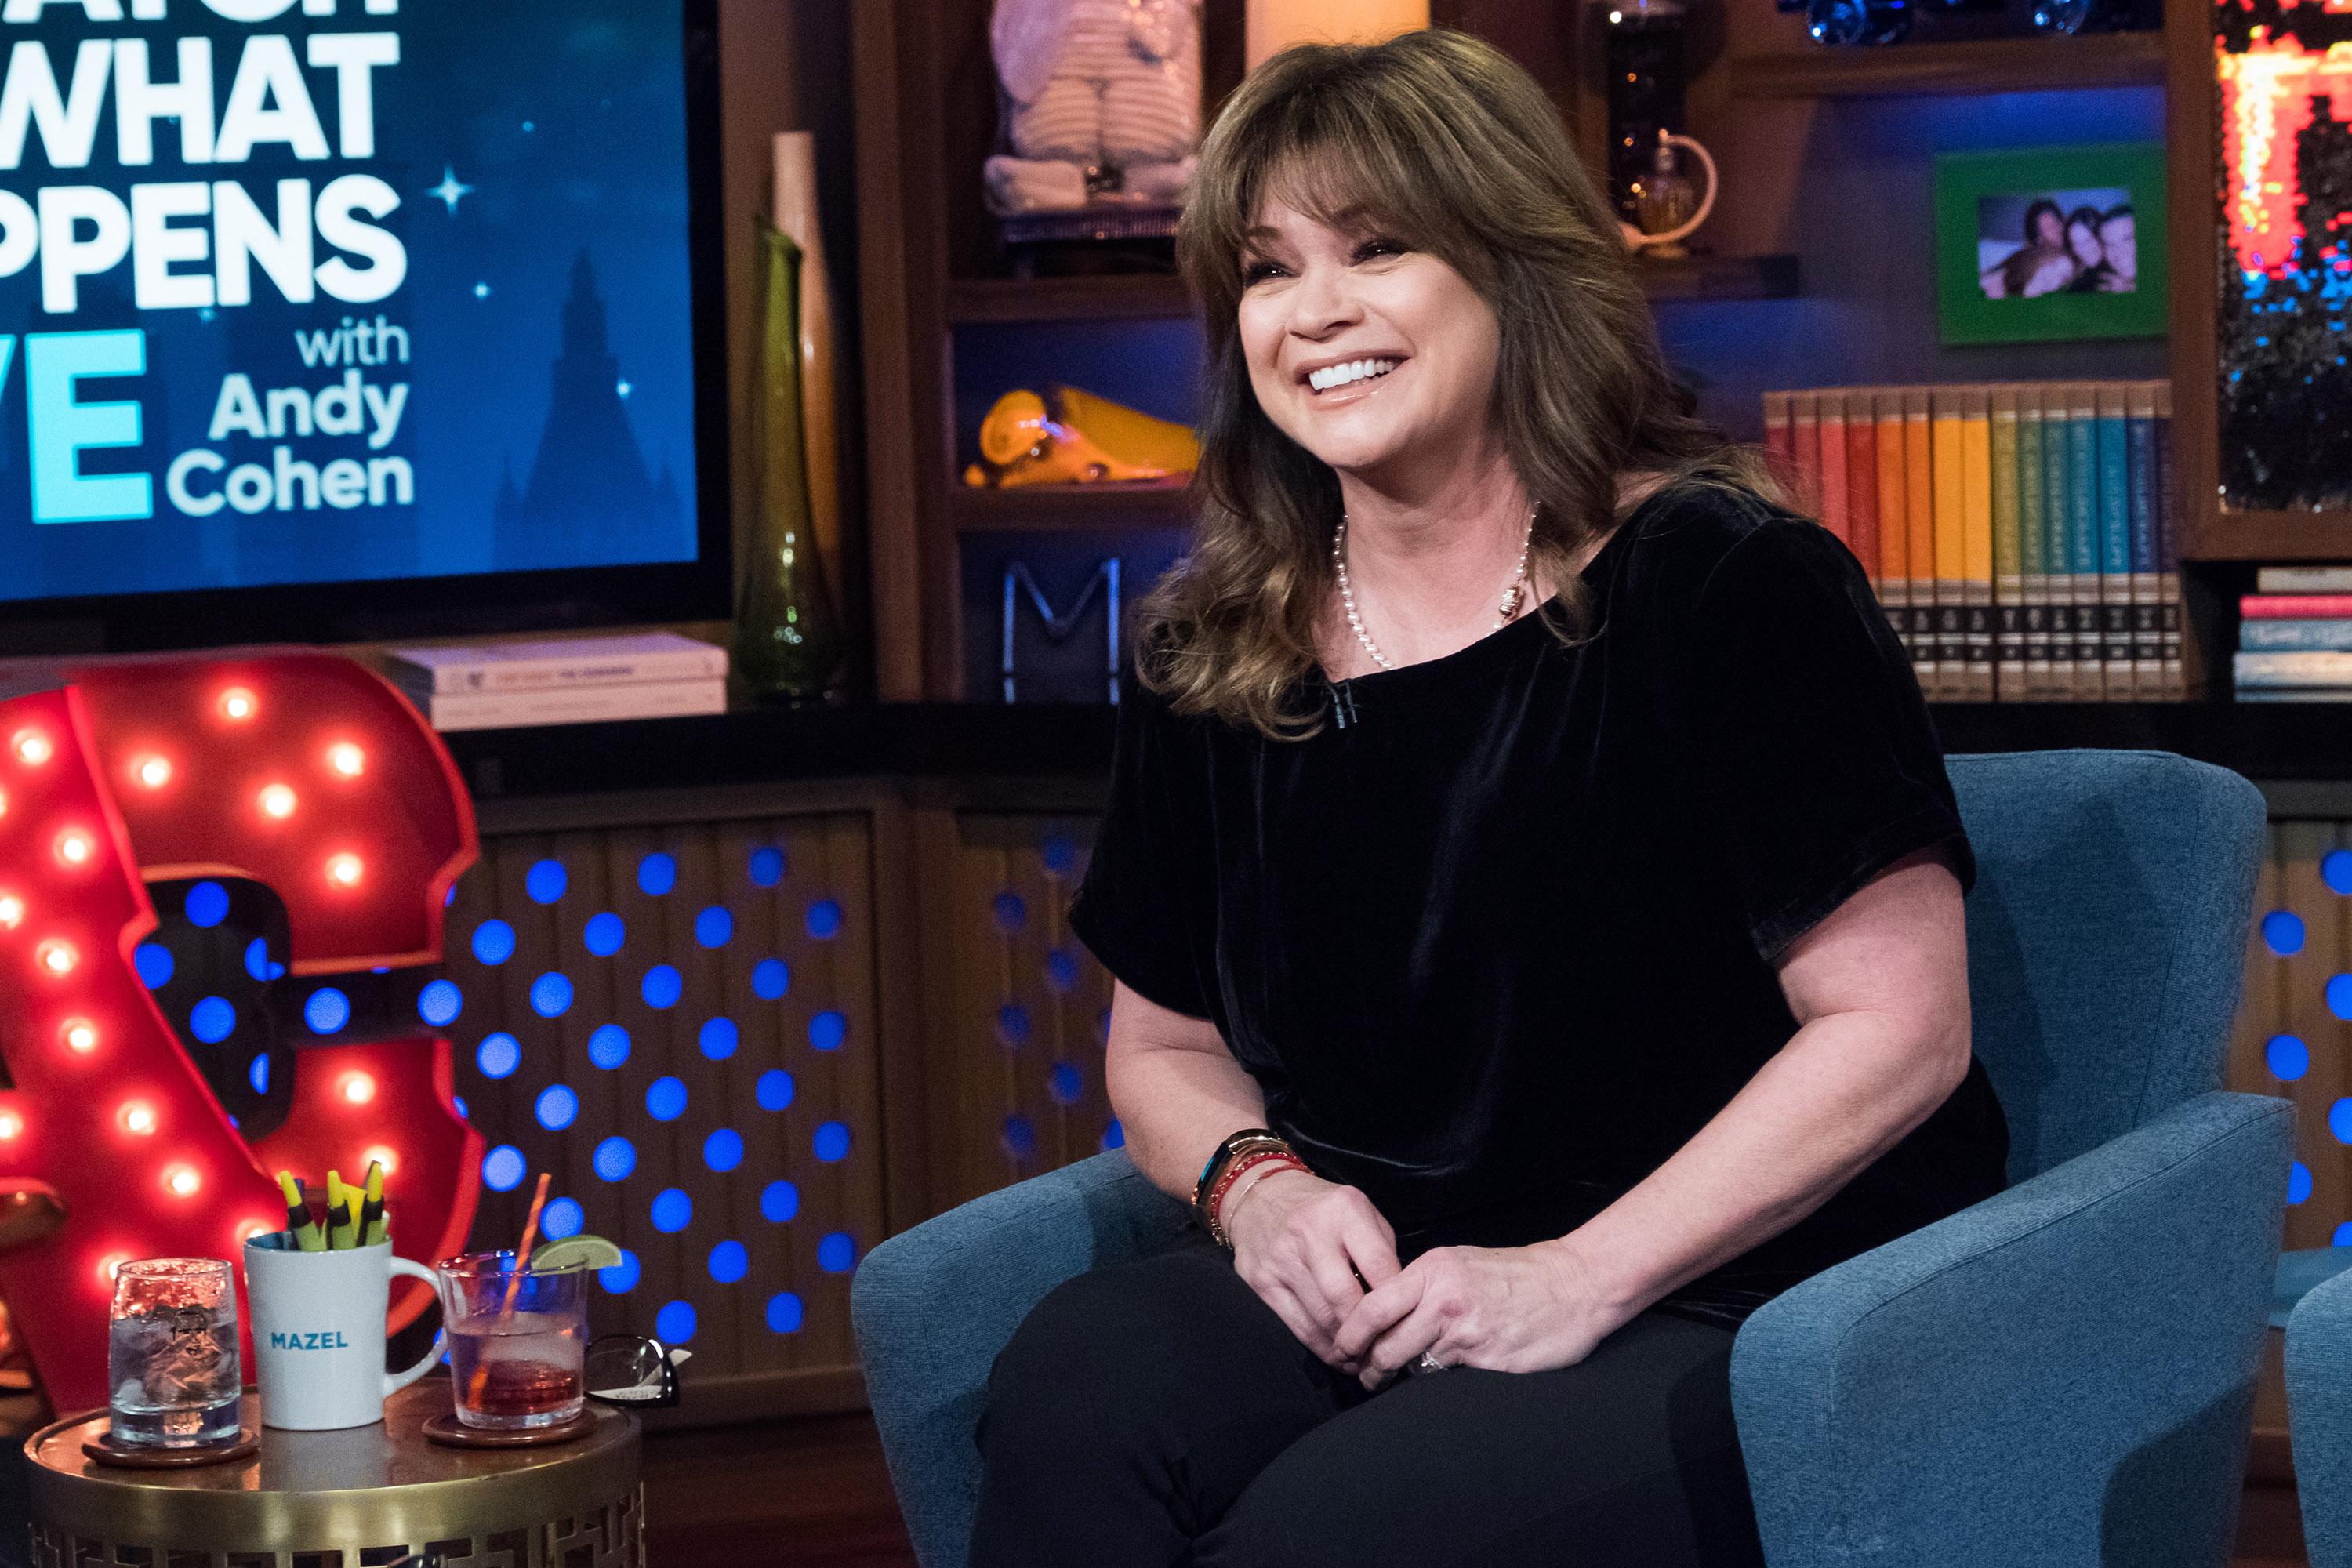 Valerie Bertinelli on a season 14 episode of "Watch What Happens Live with Andy Cohen" in 2017. | Source: Getty Images